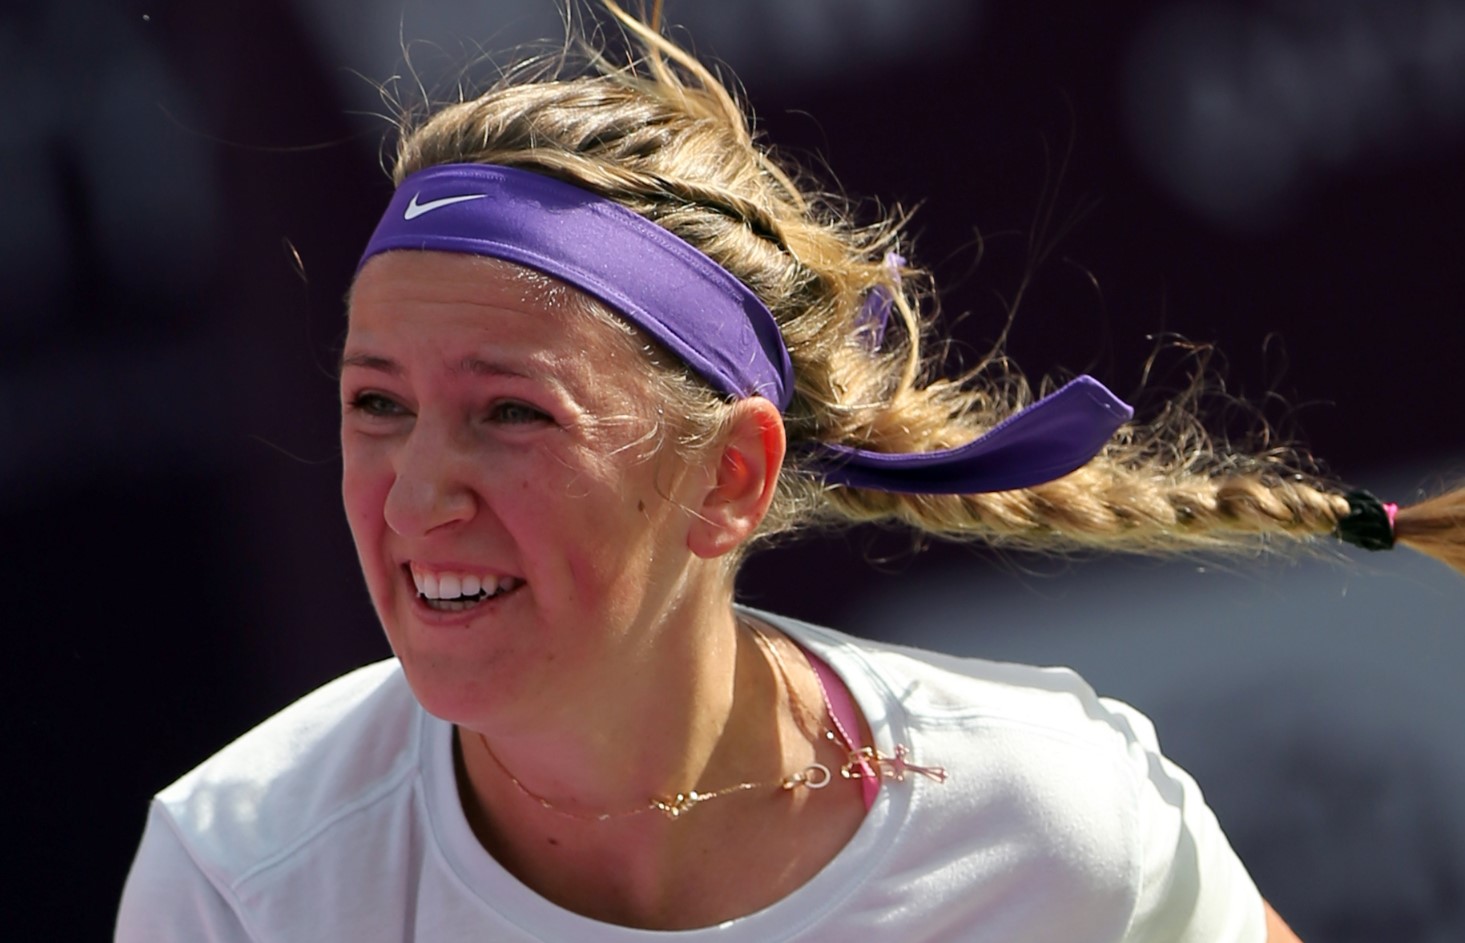 What did Vika Azarenka do six months while not playing tennis?